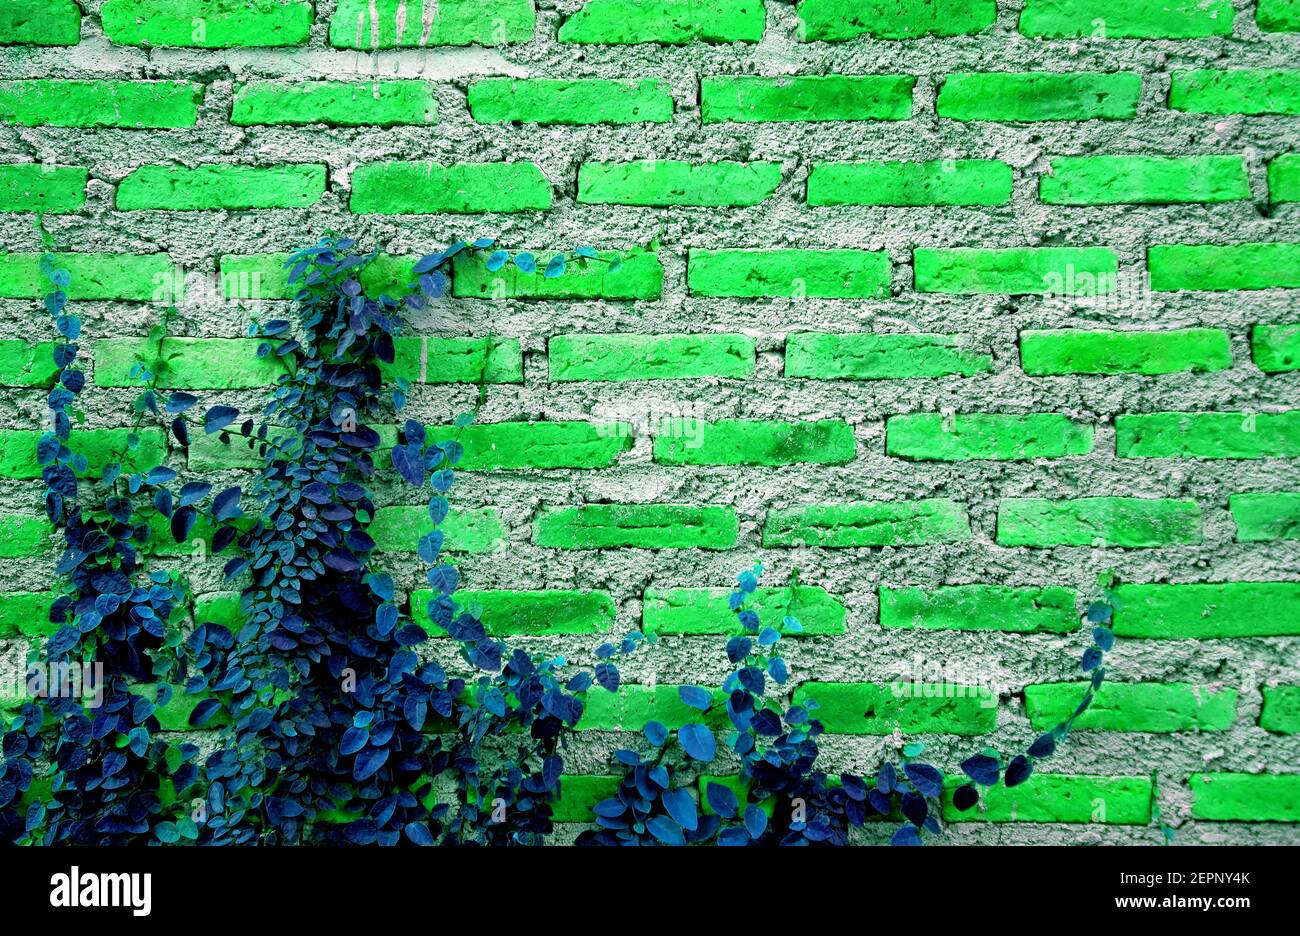 Surreal pop art style neon green colored brick wall with indigo blue  growing plant Stock Photo - Alamy